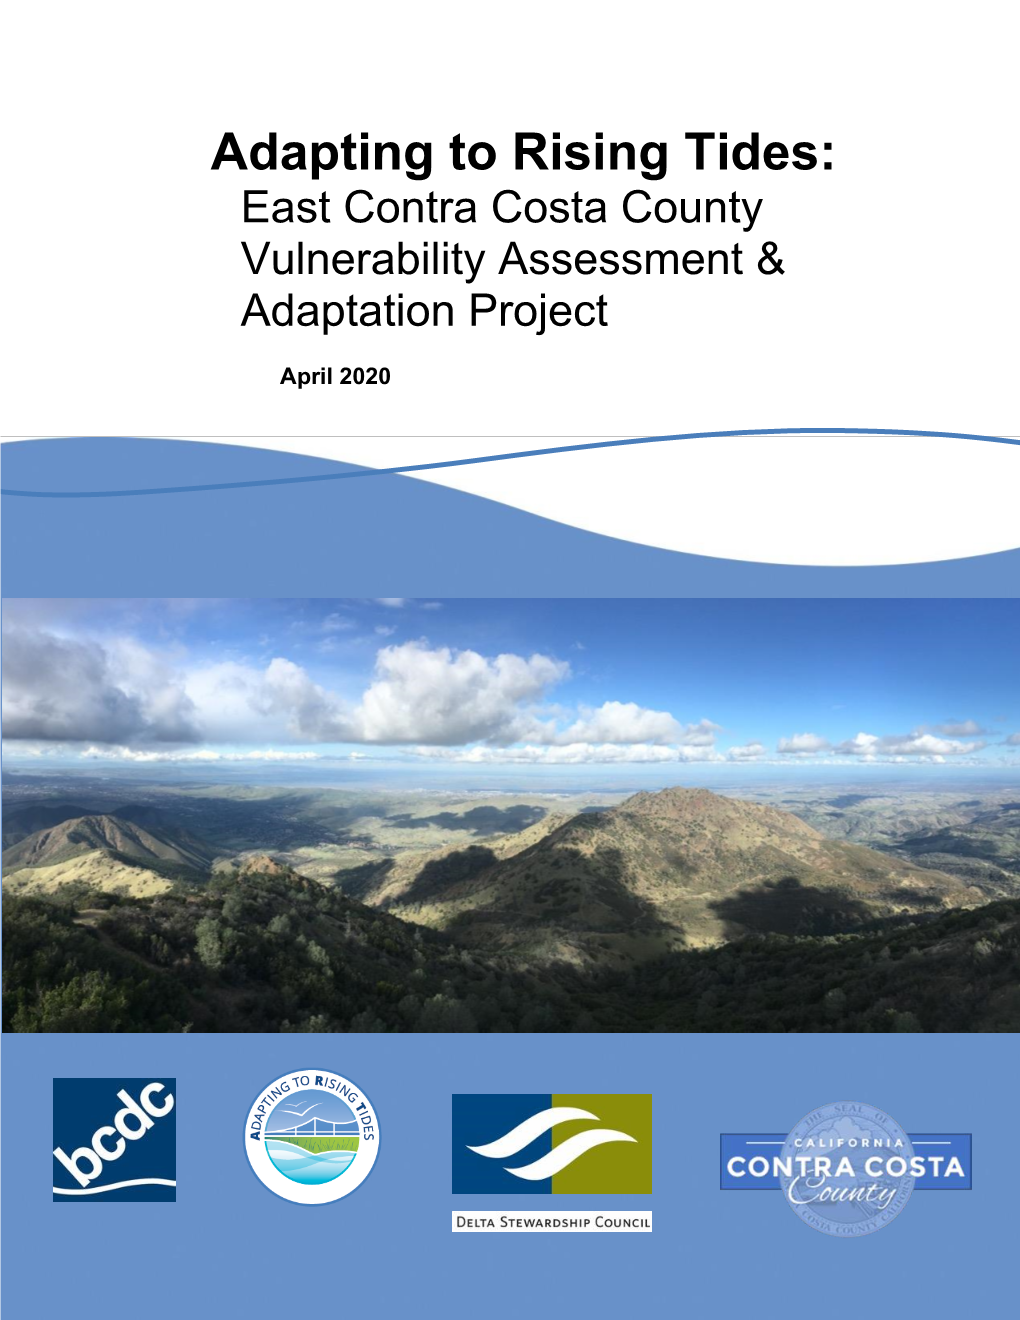 East Contra Costa County Vulnerability Assessment & Adaptation Project